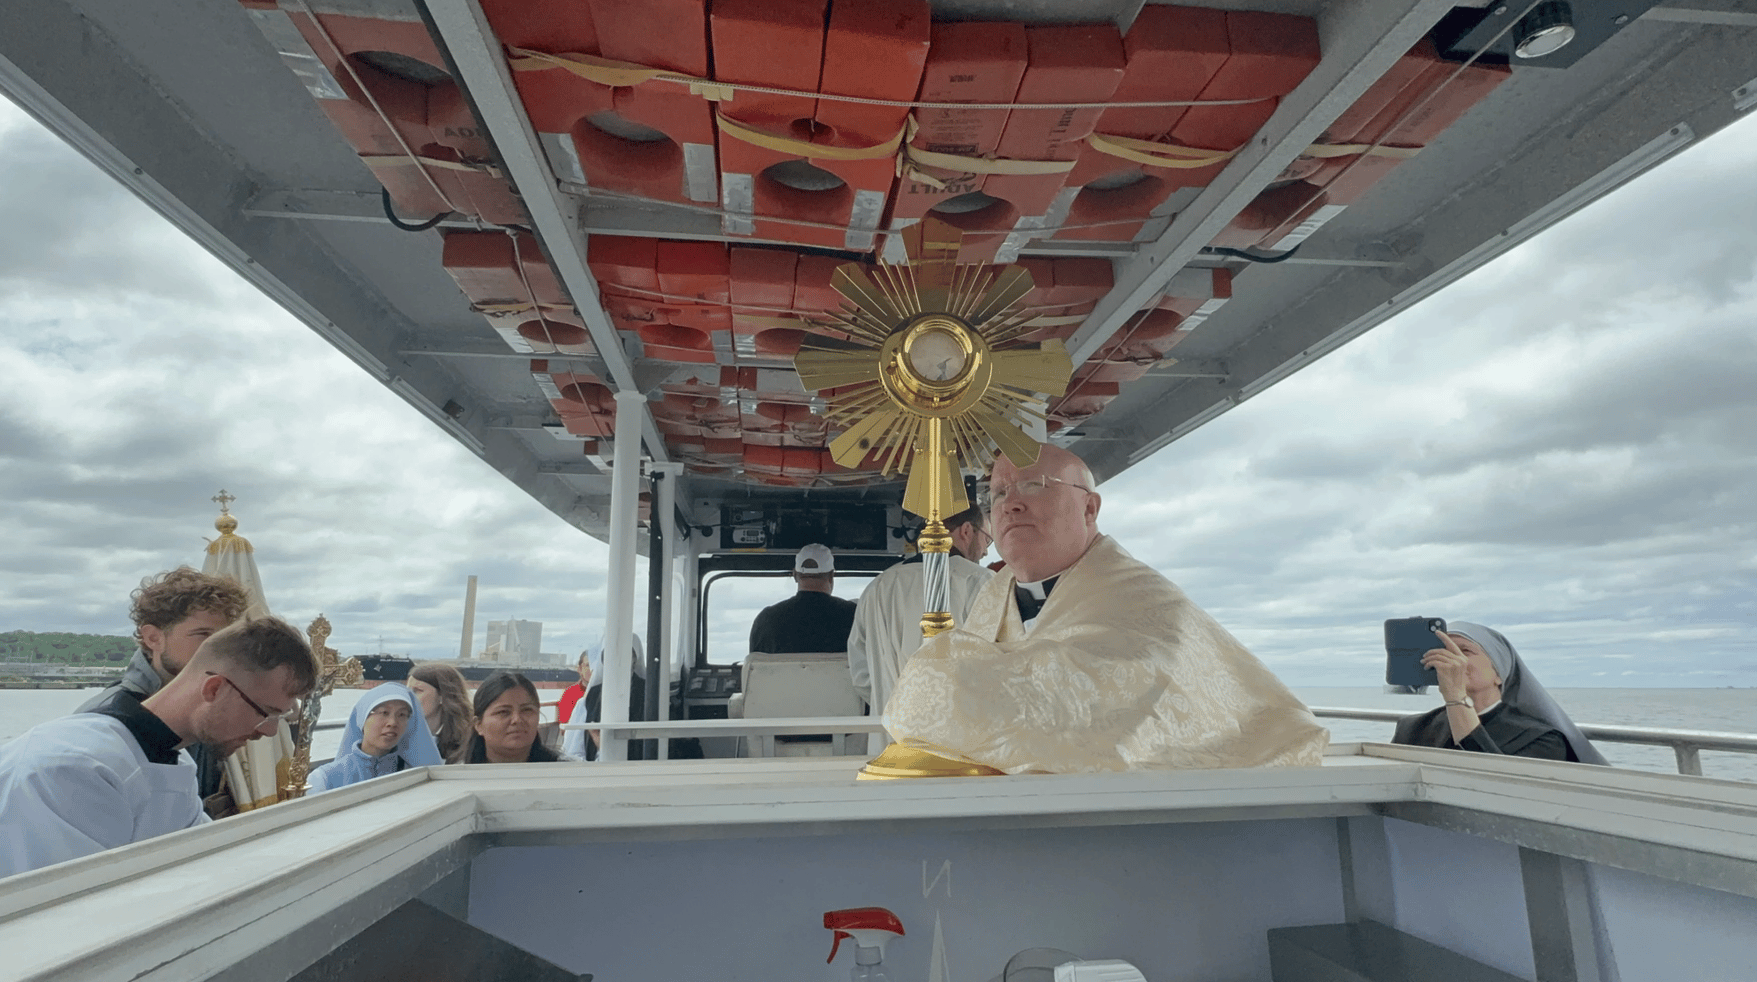 Father Roger Landry (center) pictured with the monstrance while taking a boat from New Haven to Bridgeport on day two of the National Eucharistic Pilgrimage. (Credit: Seton Pilgrimage Blog.)